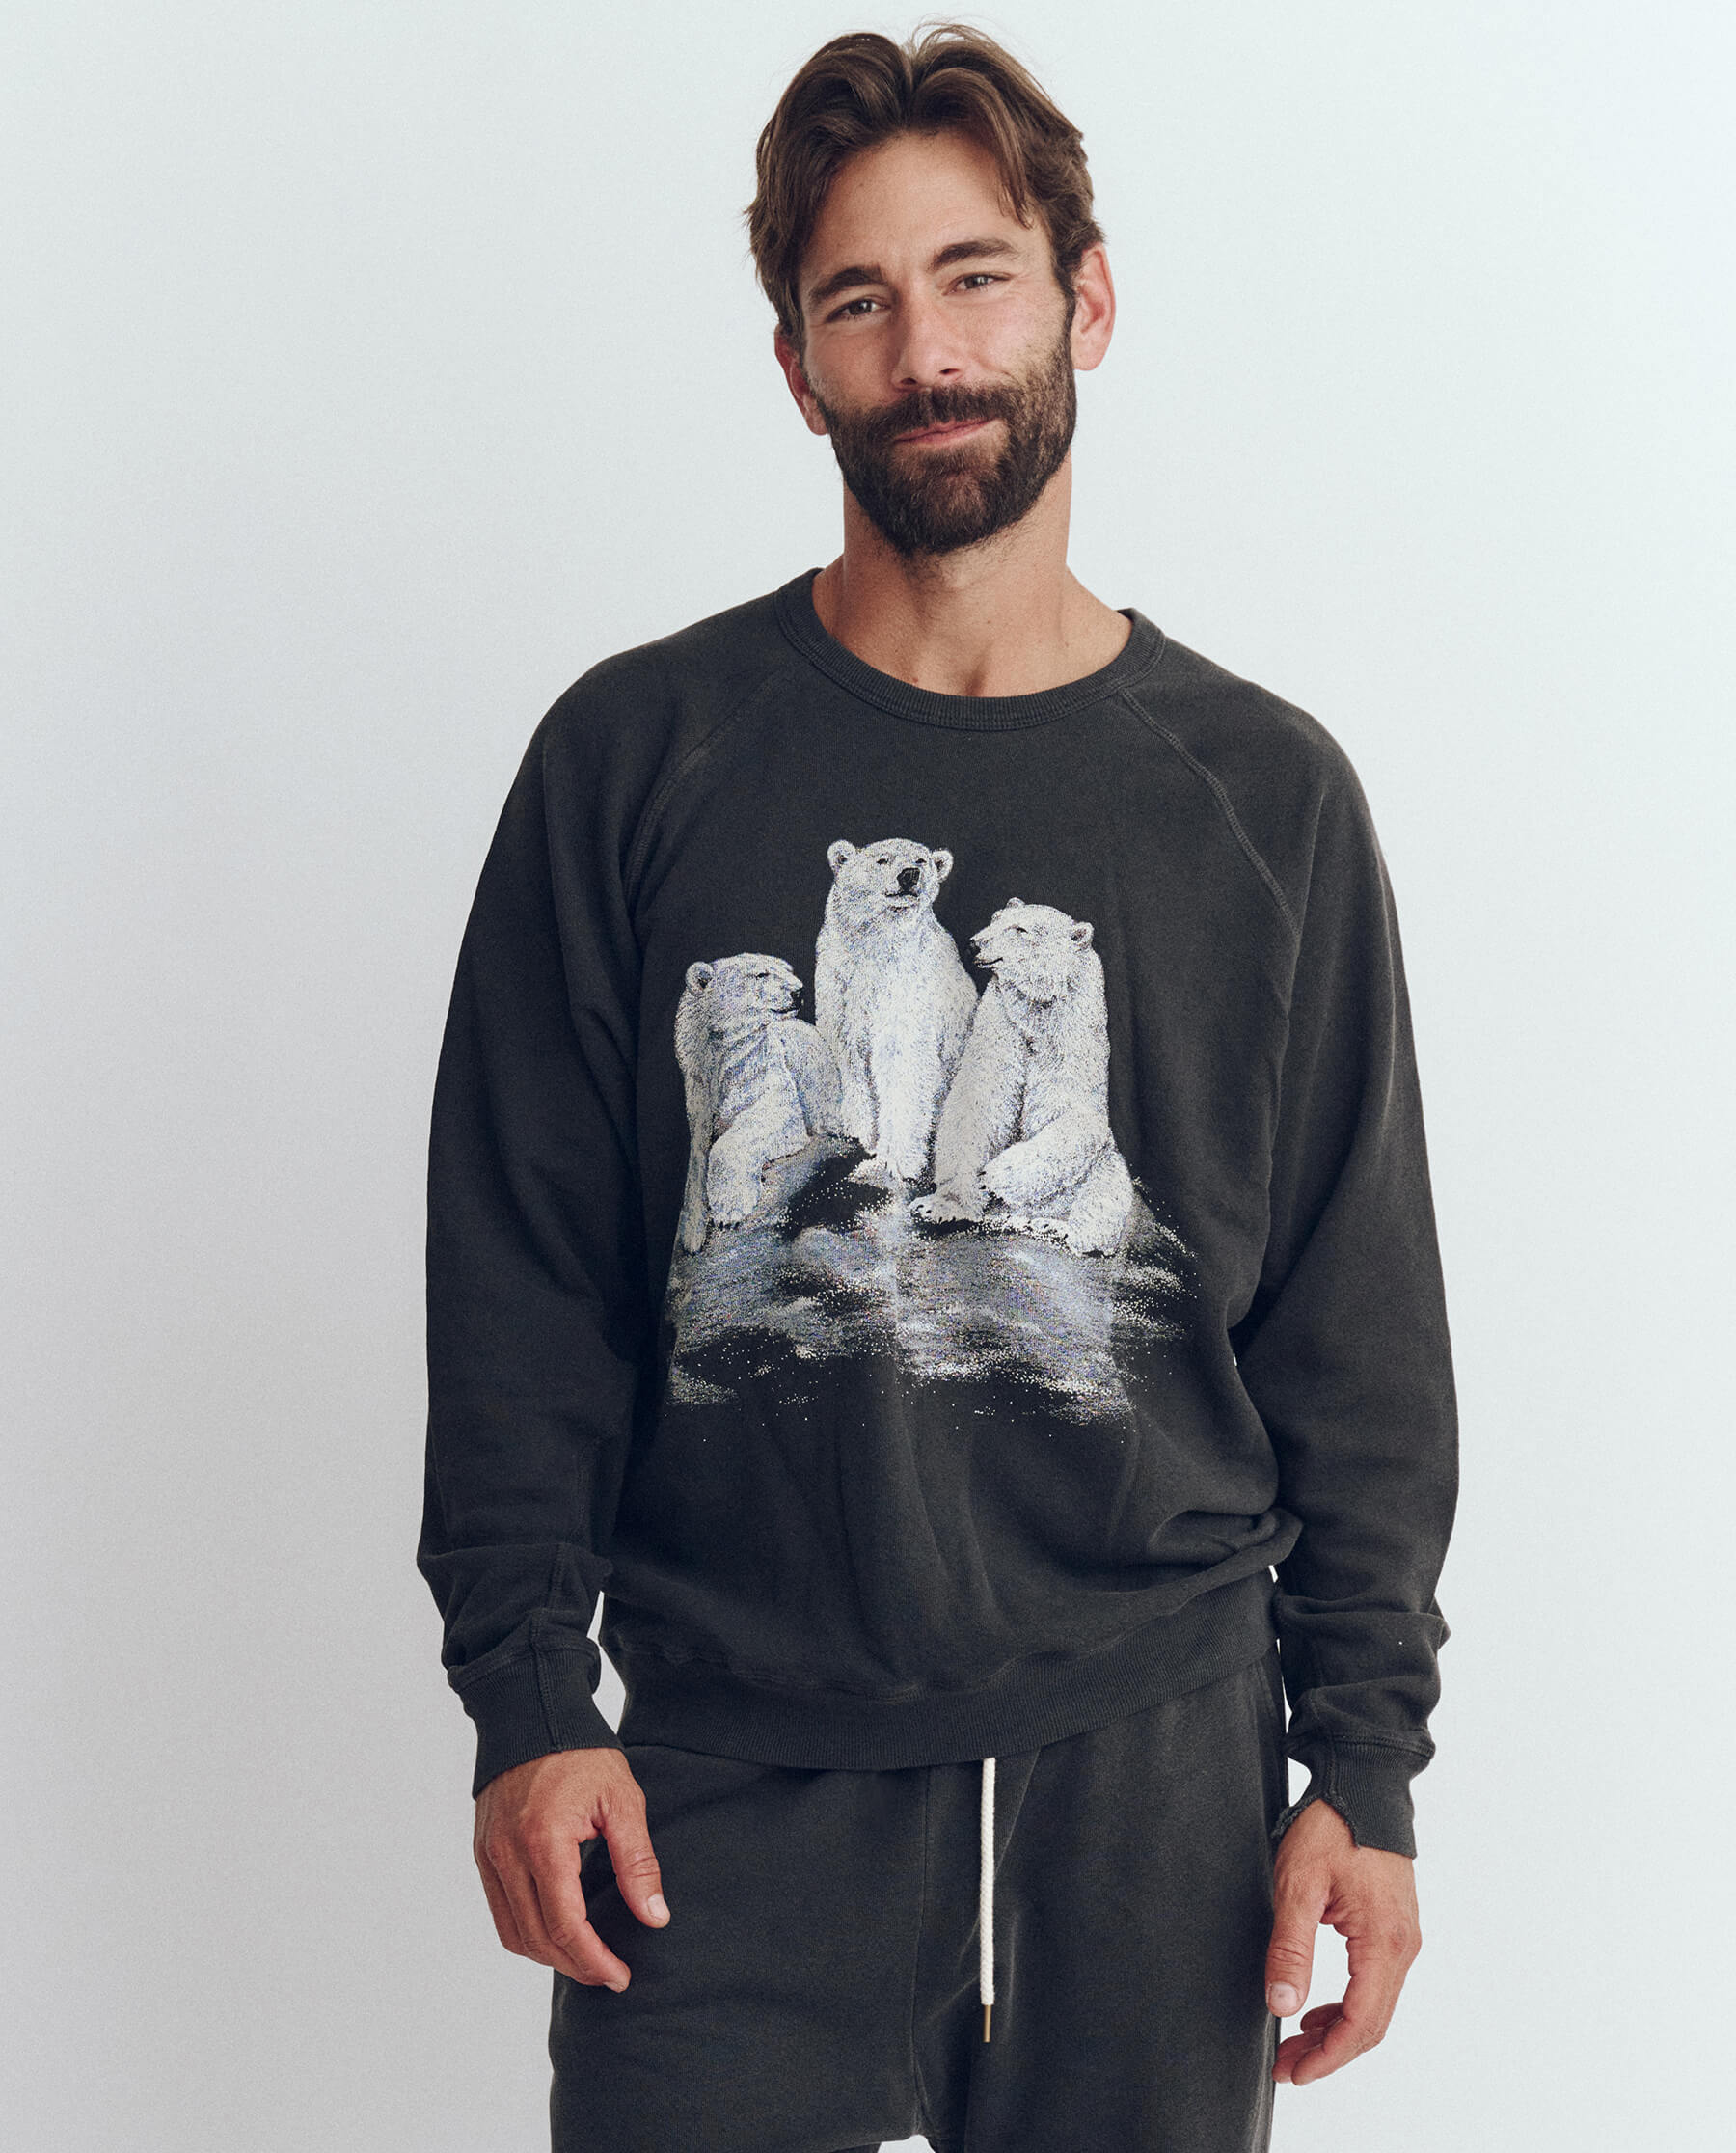 The Men's College Sweatshirt. Graphic -- Washed Black with Polar Bear Graphic SWEATSHIRTS THE GREAT. HOL 23 D1 MEN